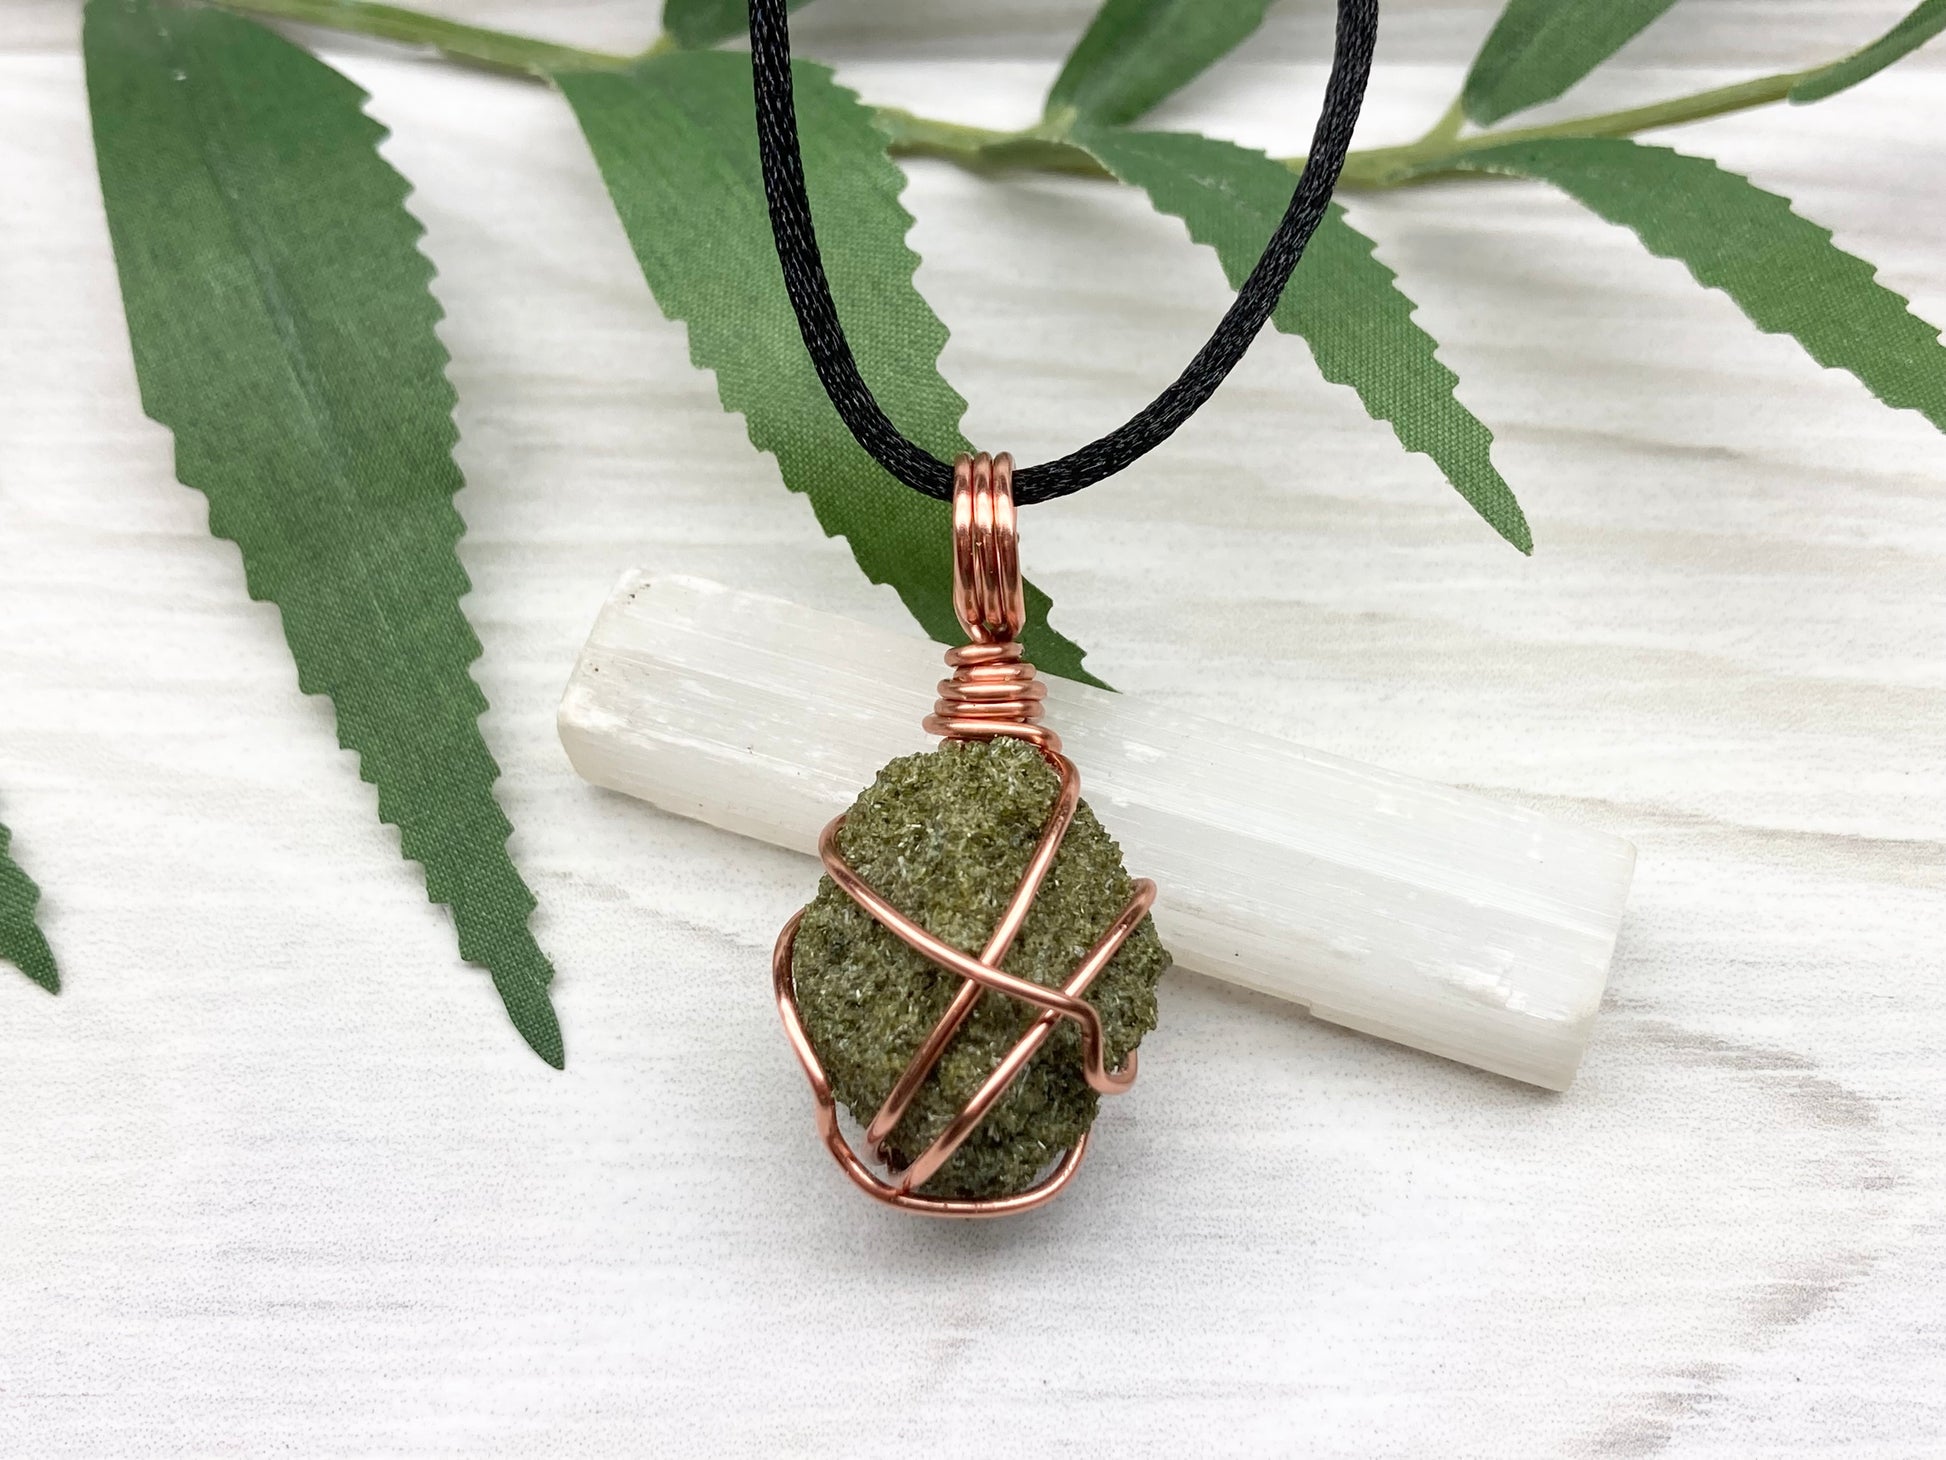 Natural Epidote Necklace. Raw Epidote Crystal Wrapped With Tarnish Resistant Pure Copper. Green Stone Pendant. Comes On A Black Chain. New Age Jewelry.